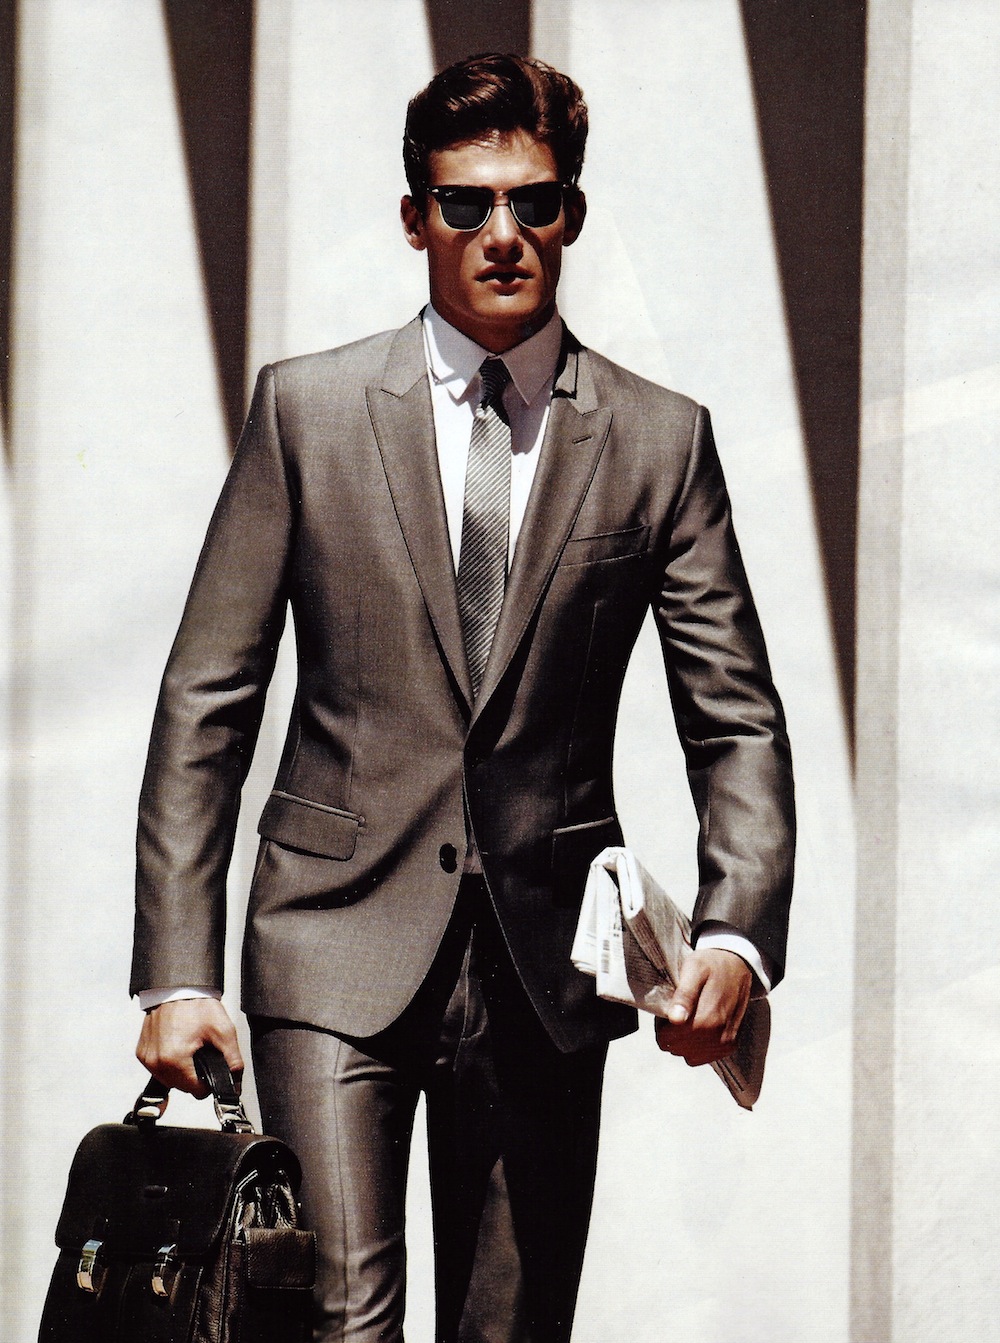 Danny Beauchamp Suits Up for Italian GQ – The Fashionisto